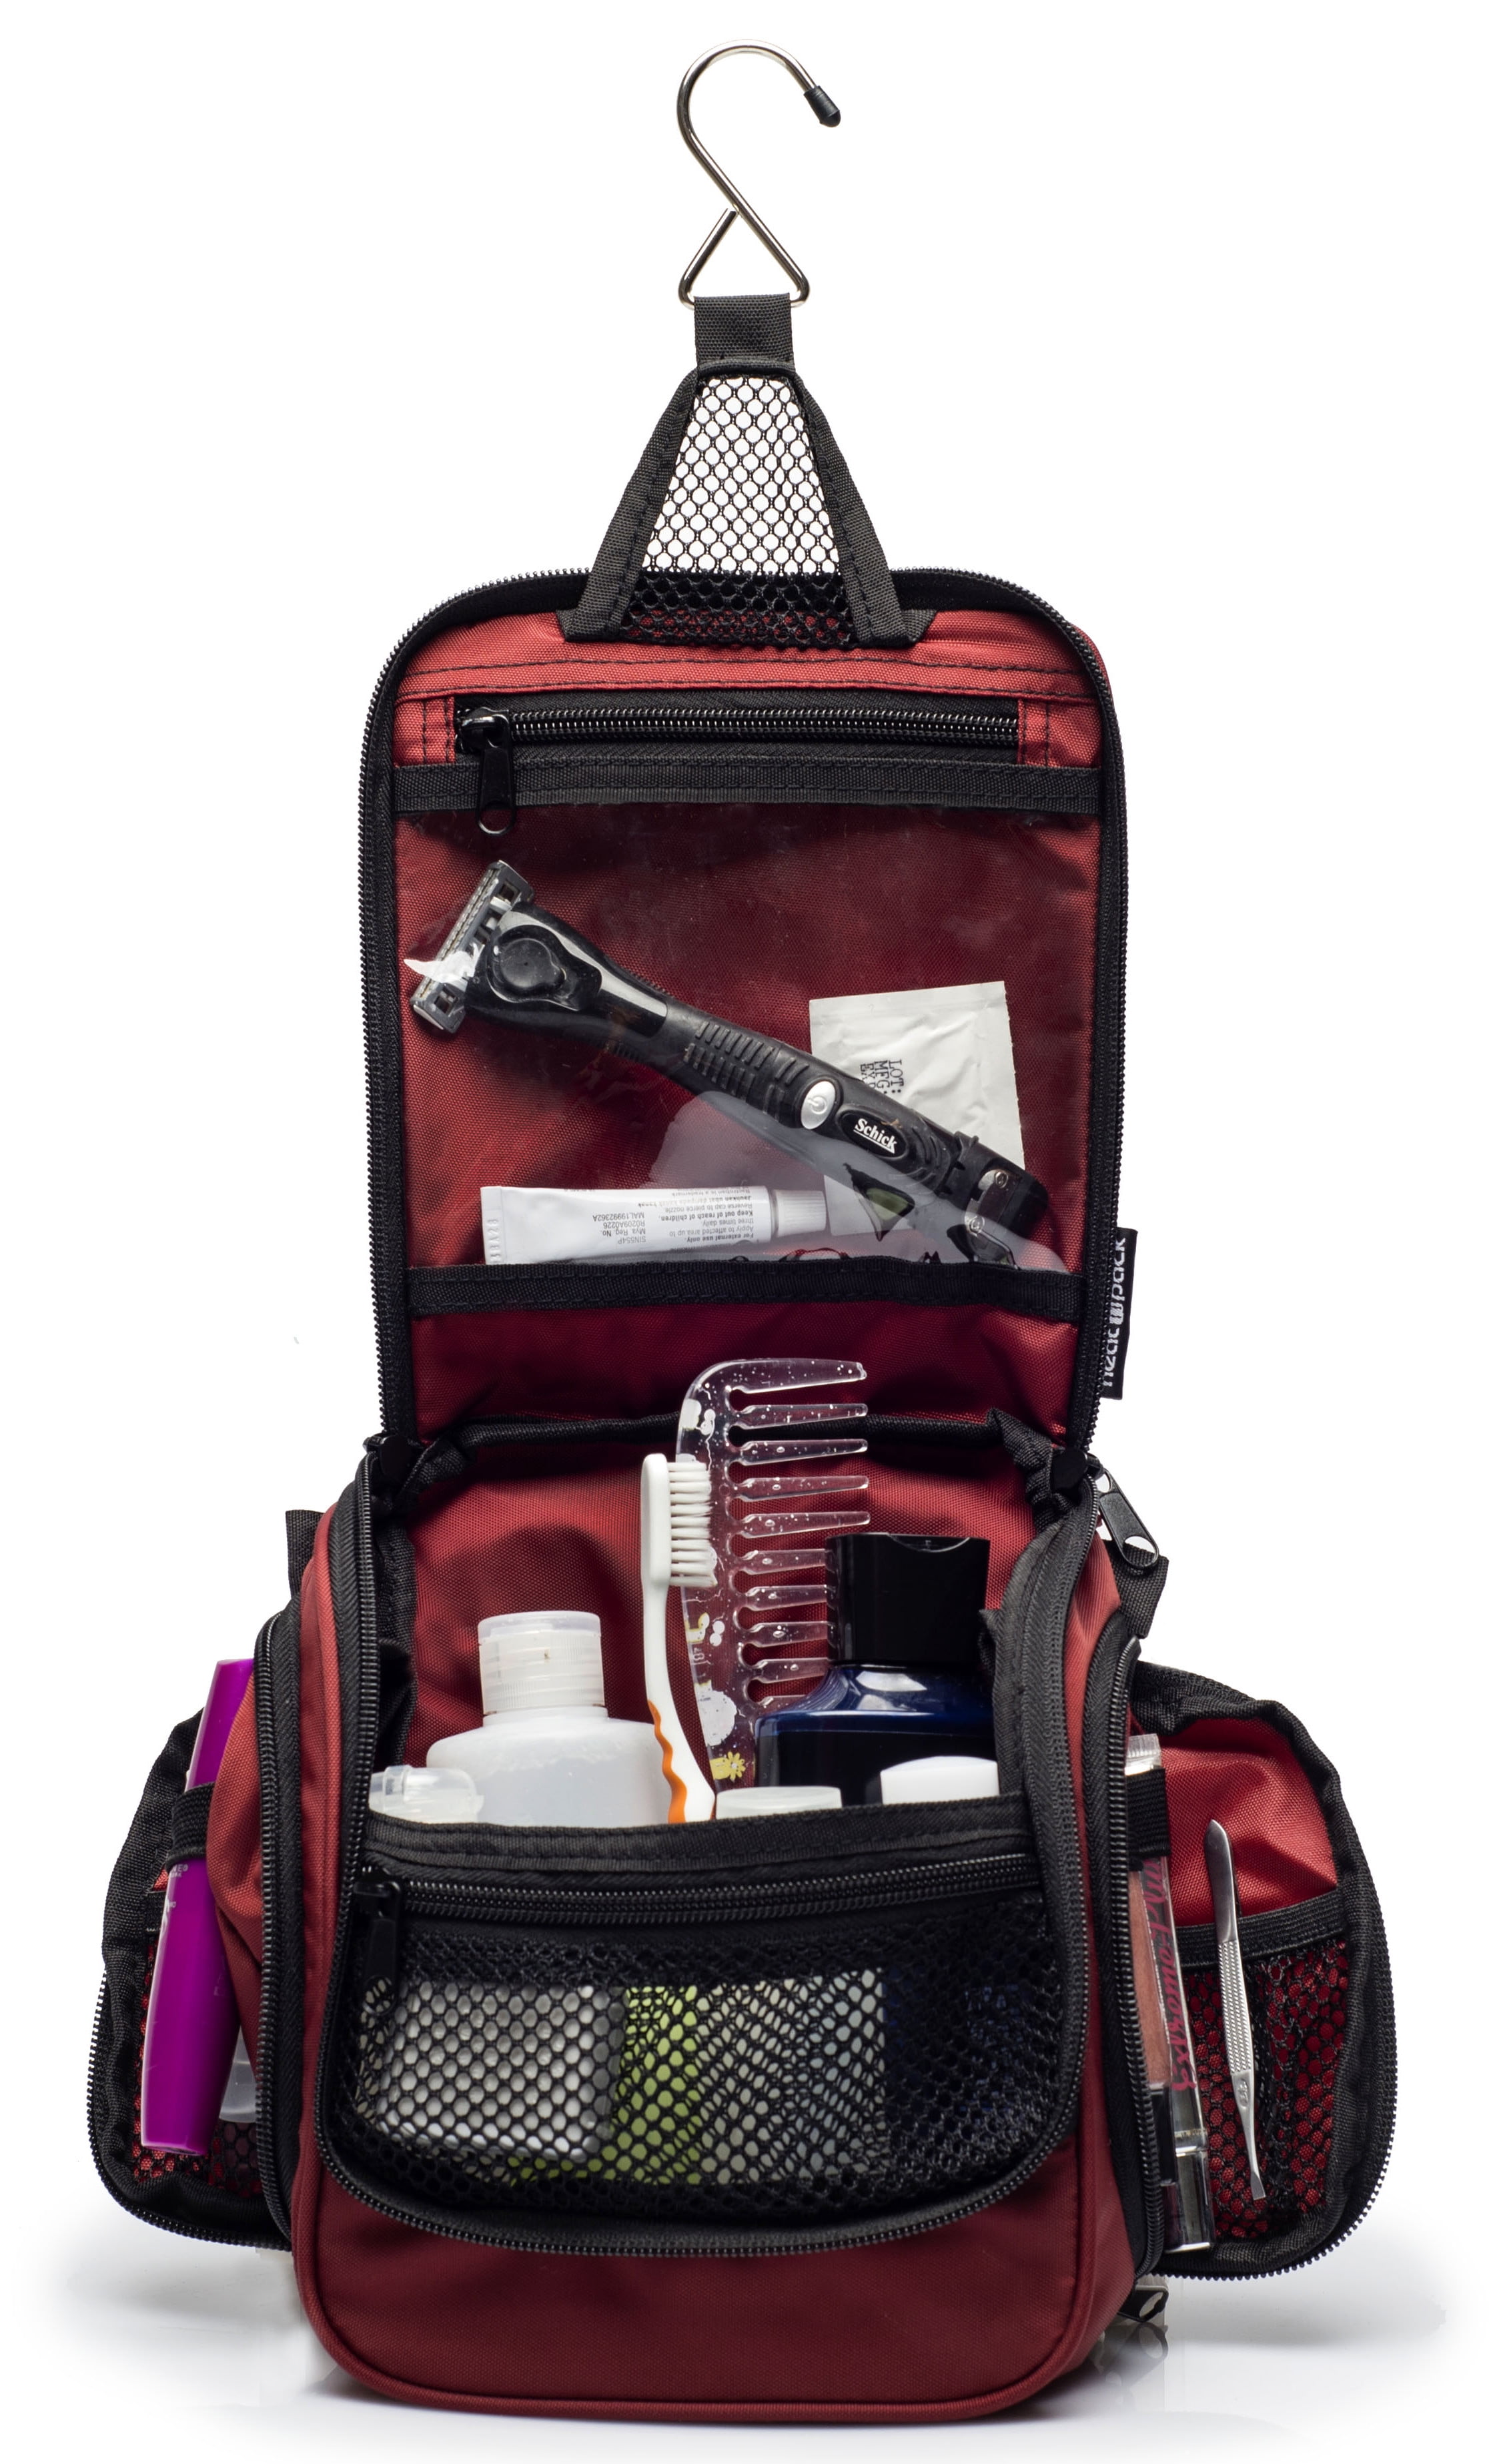 NeatPack Compact Hanging Toiletry Bag, Red - Walmart.com